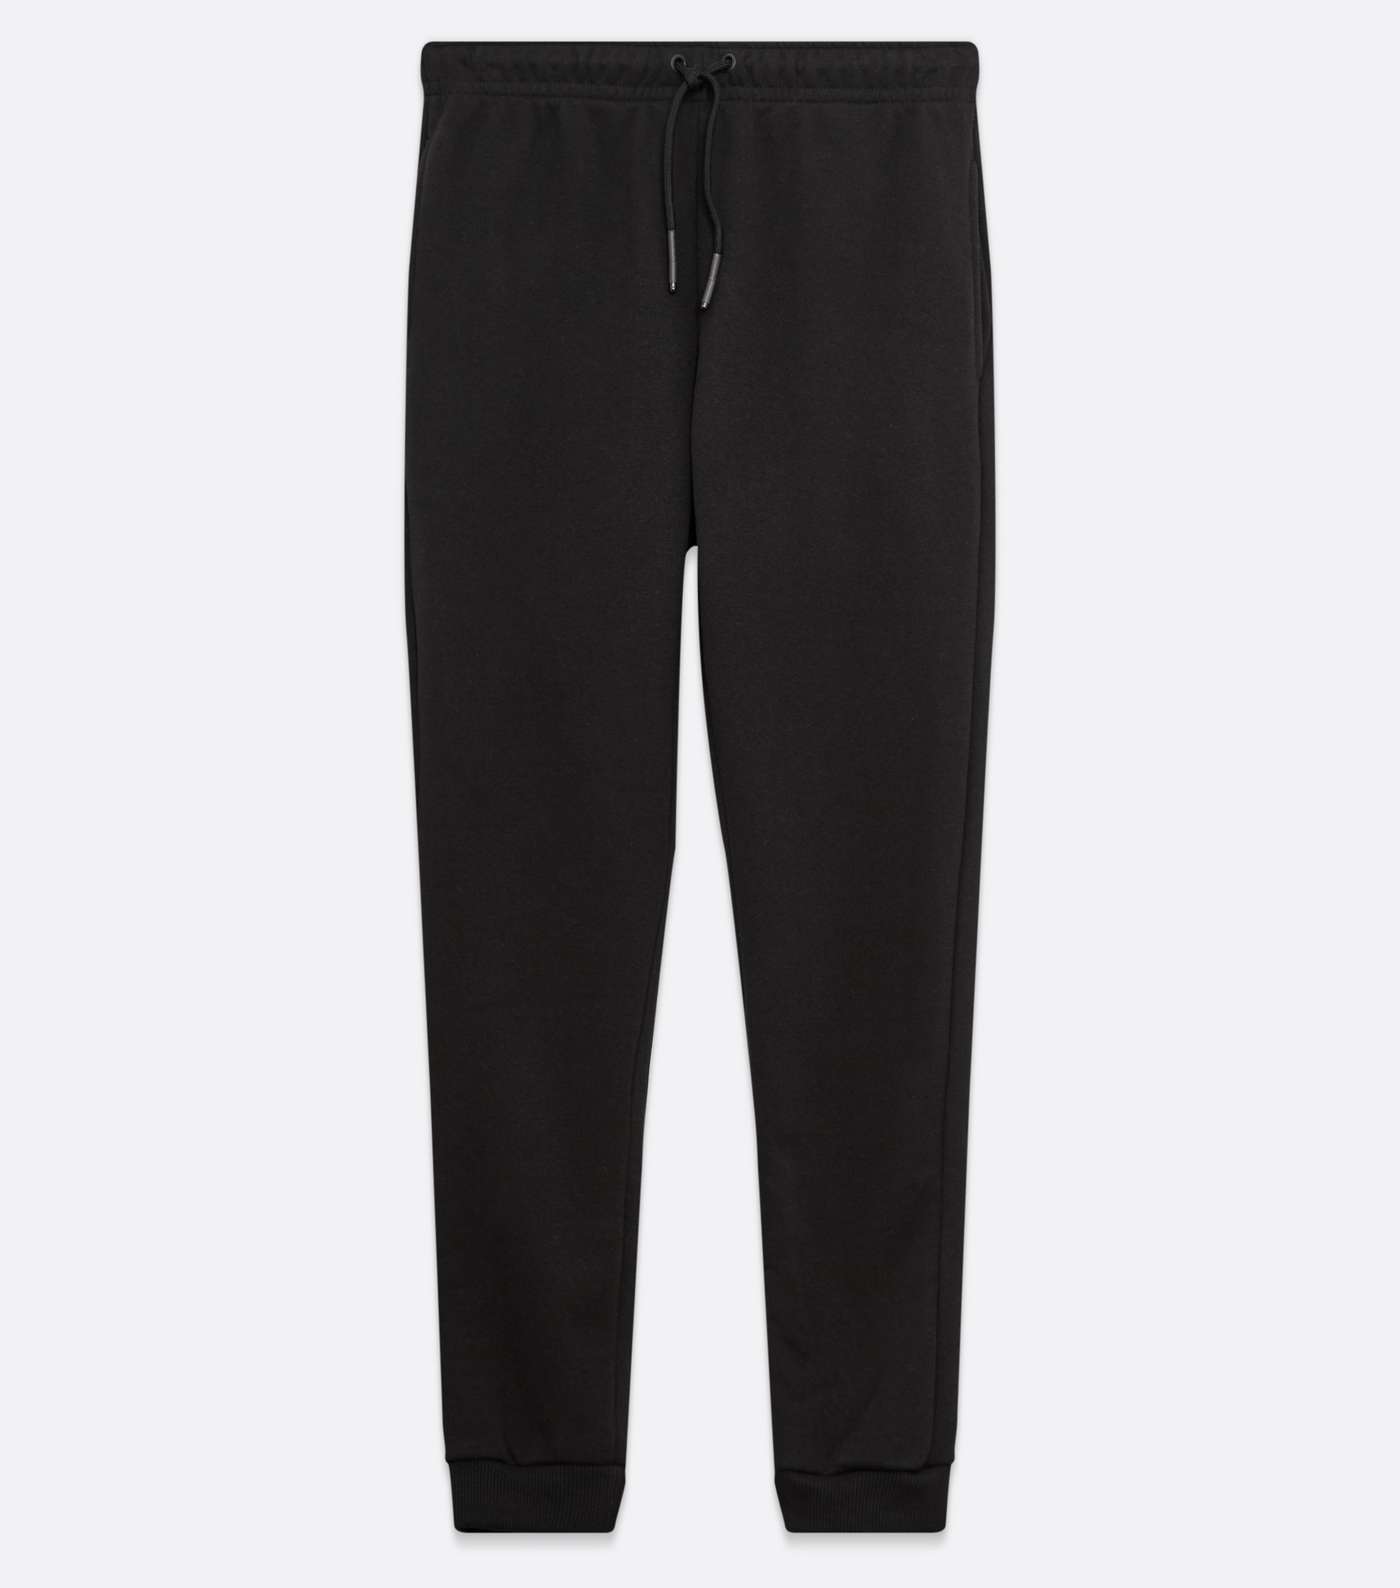 Only & Sons Black Jersey Drawstring Joggers Image 5